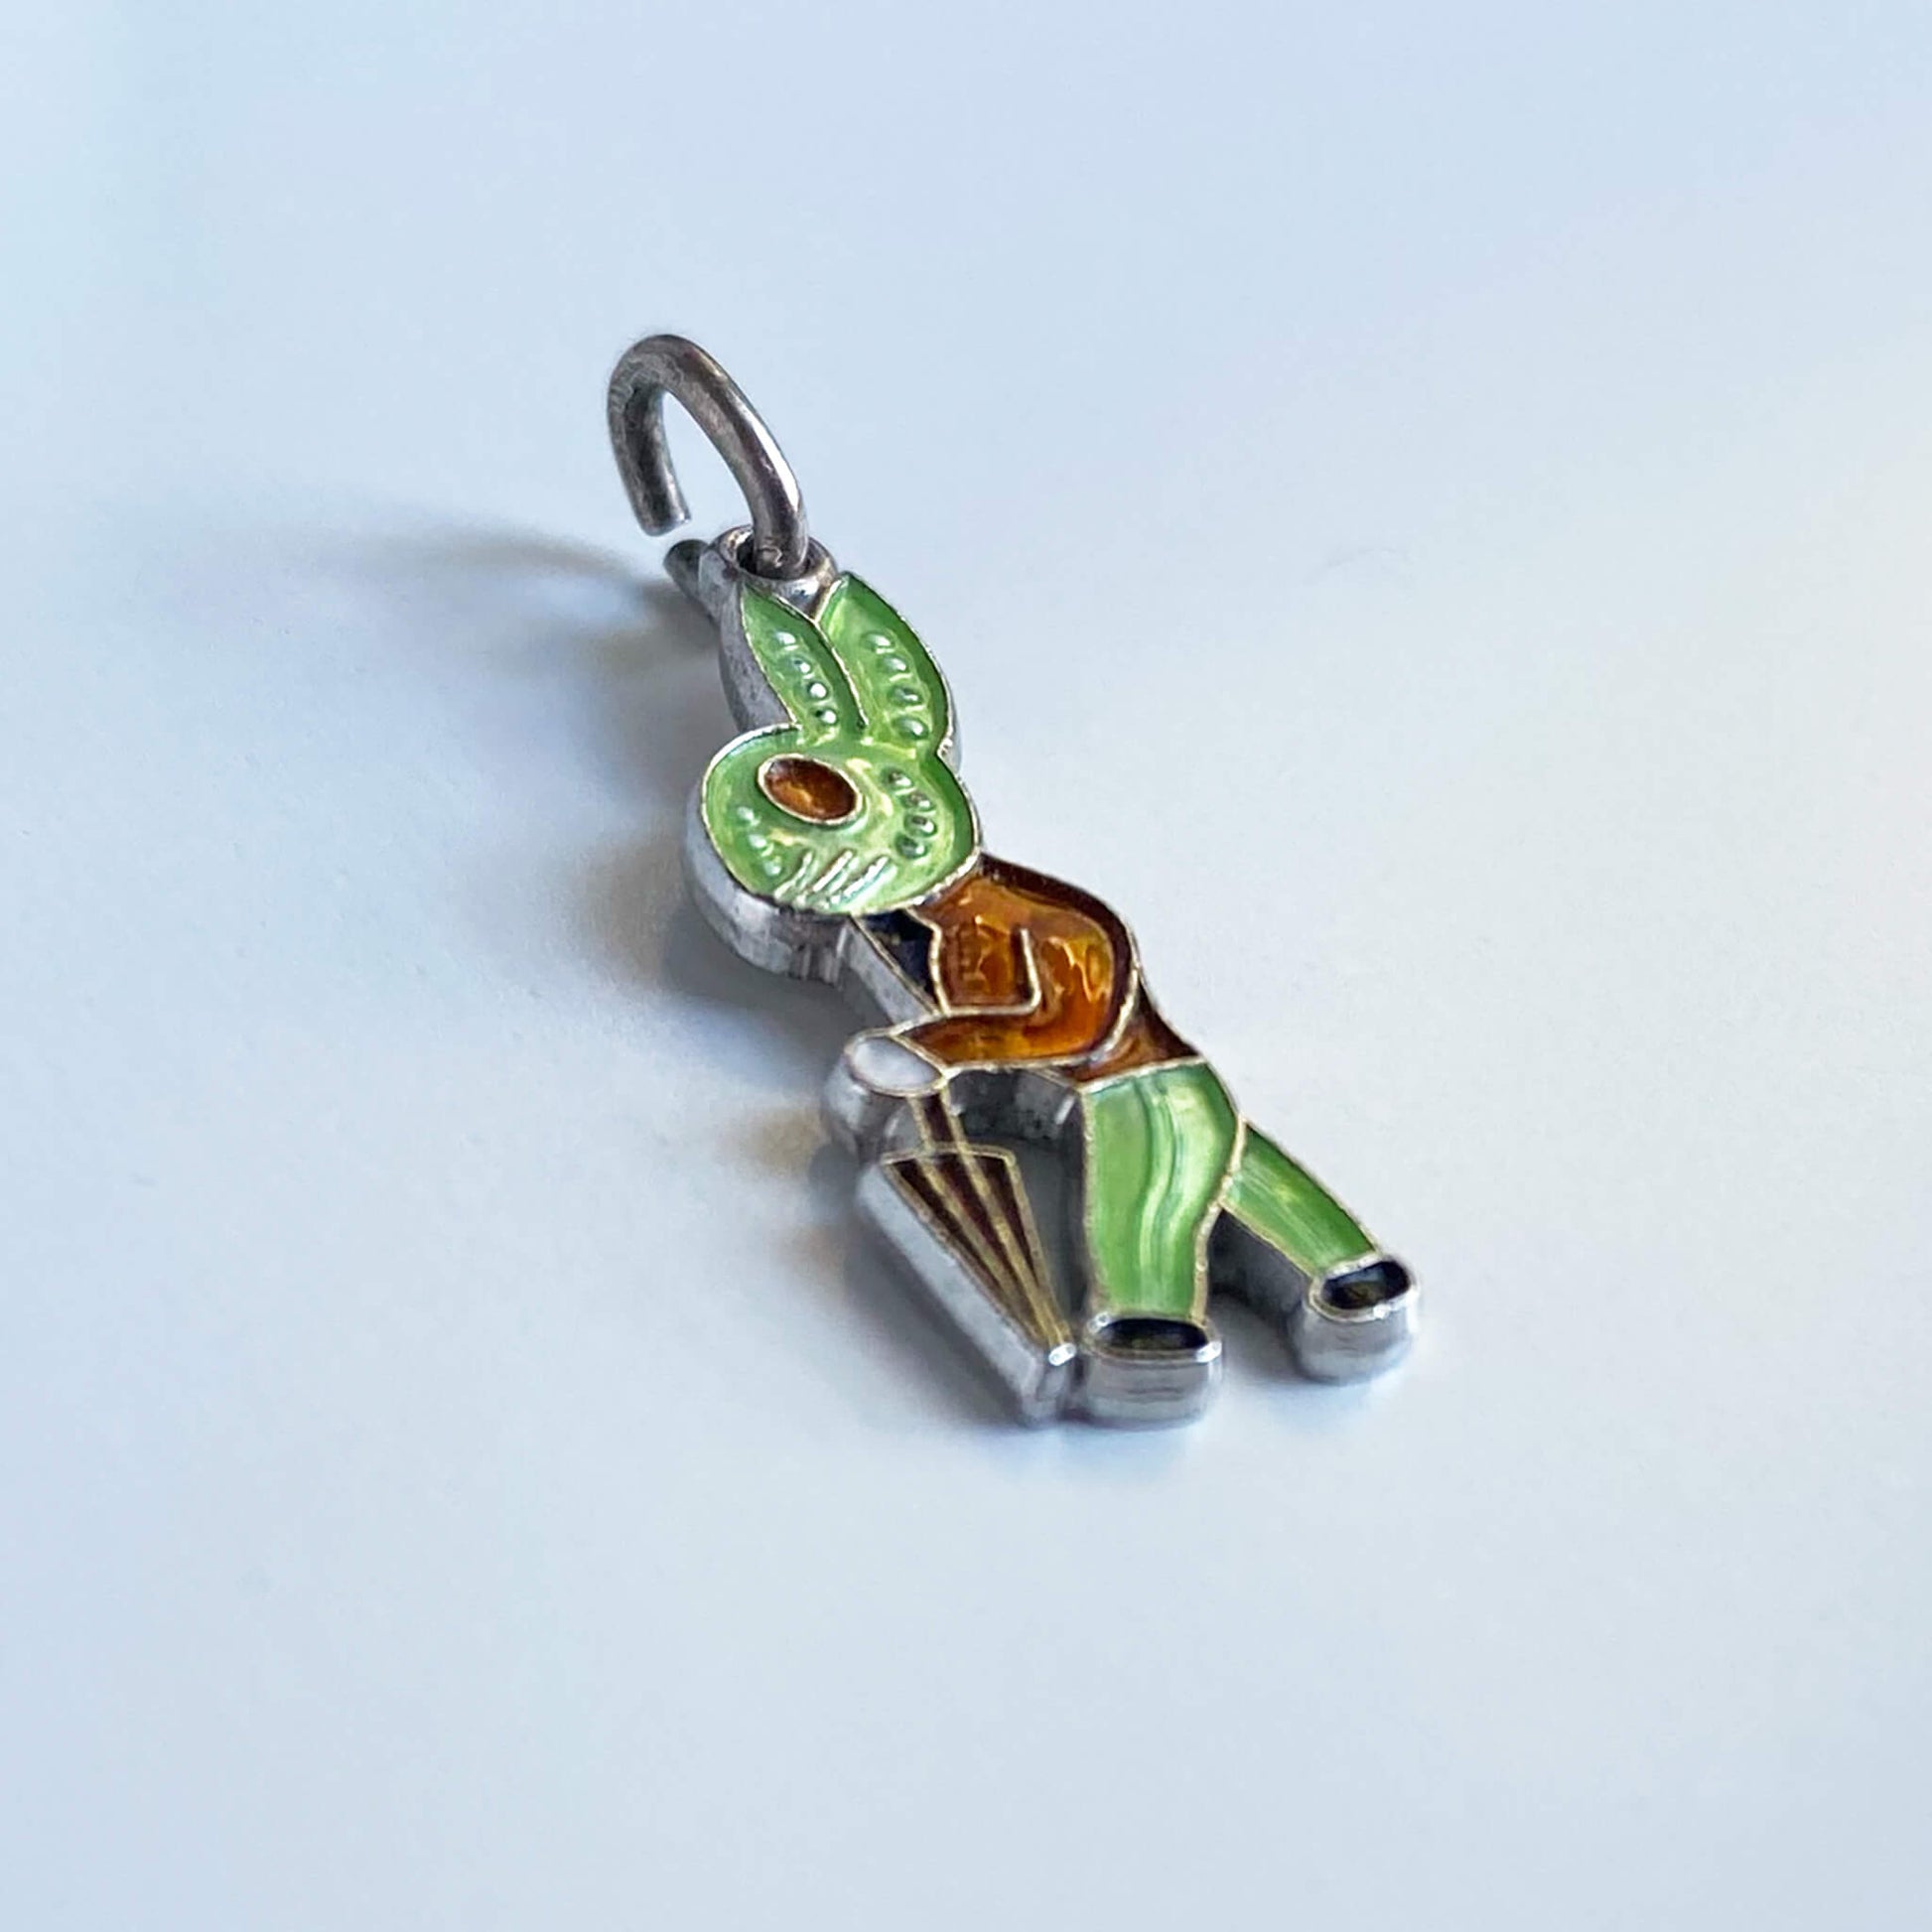 Wells Top Hat Rabbit Charm sterling silver and green enamel animal pendant